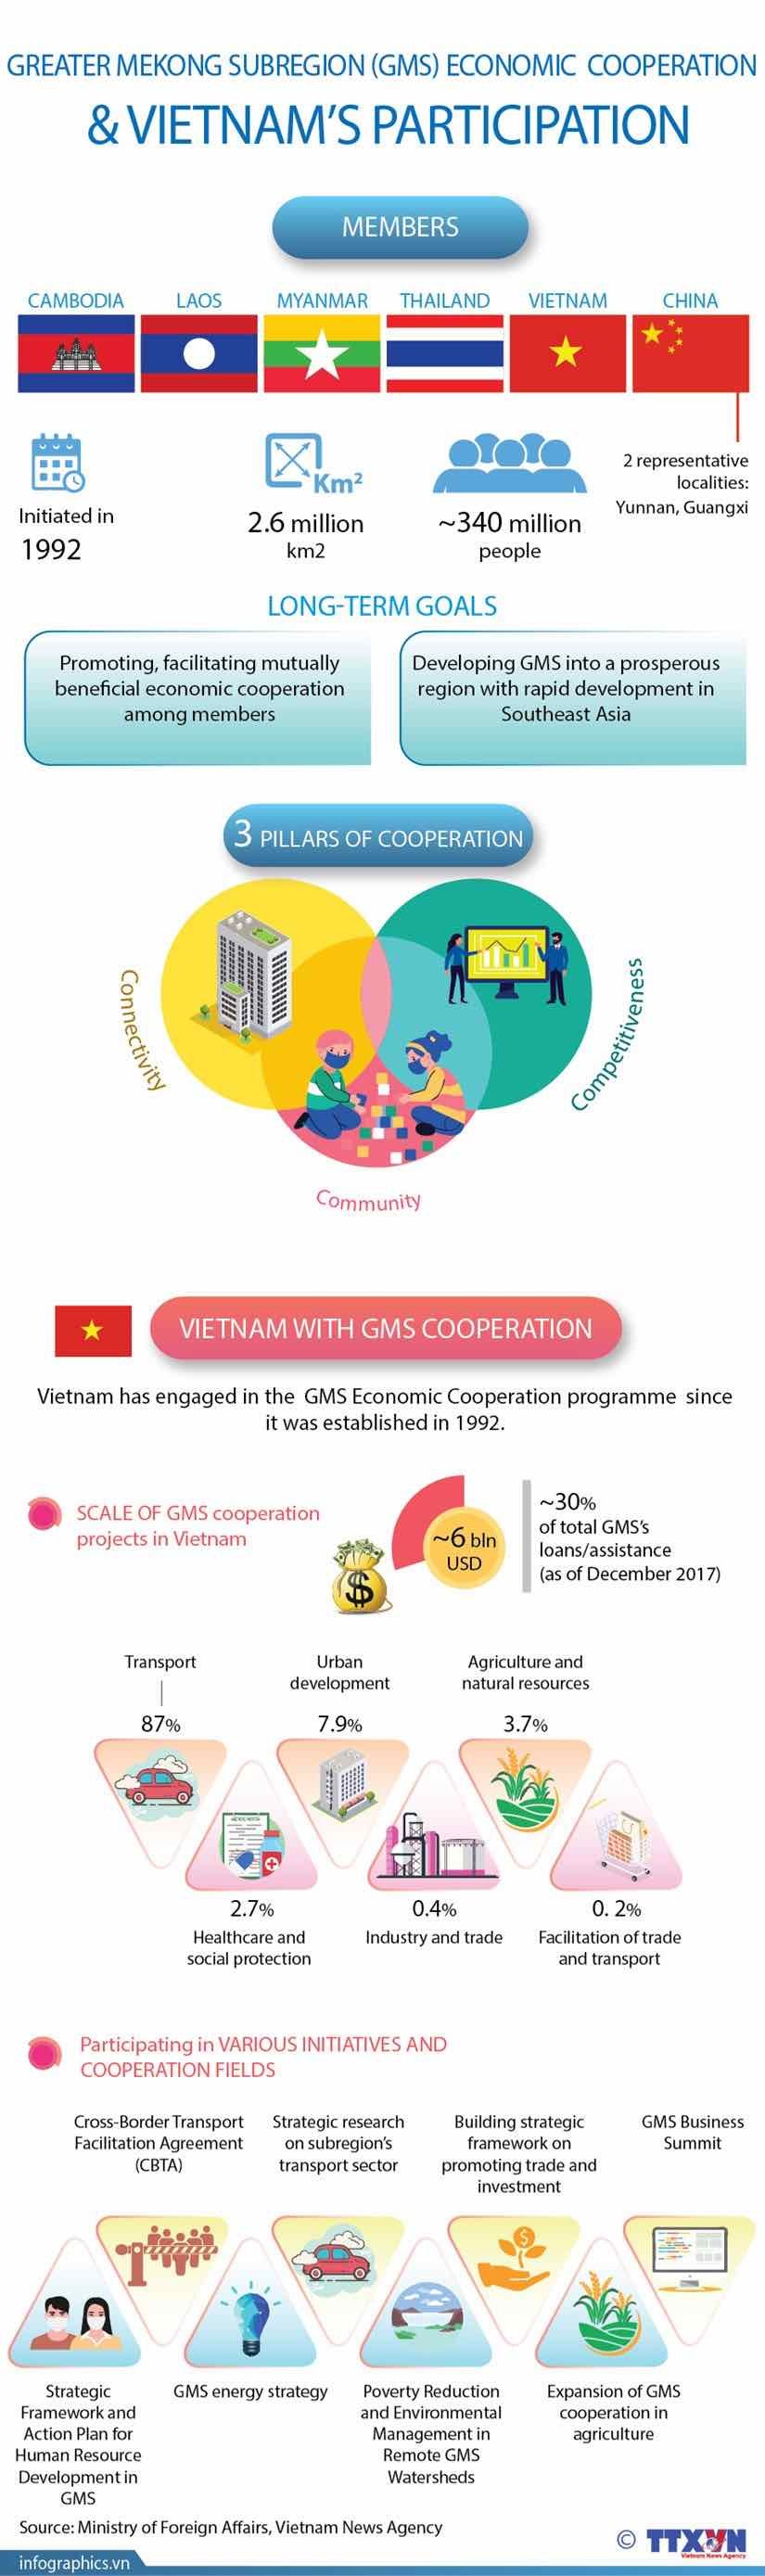 Greater Mekong Subregion (GMS) economic cooperation & Viet Nam's participation